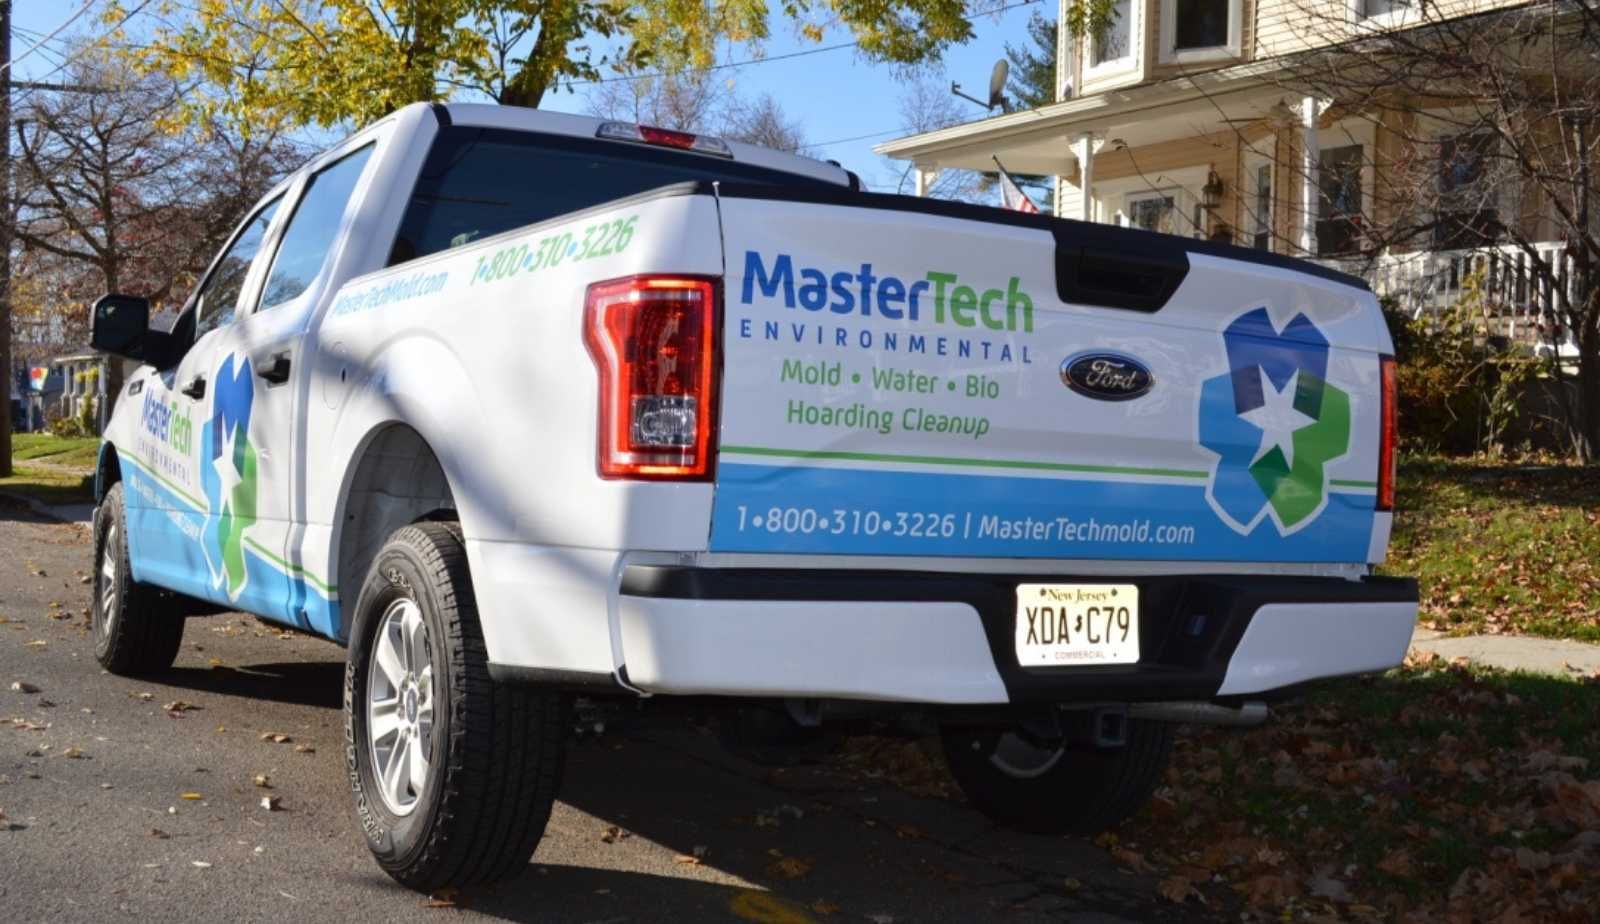 Benefits of Buying a Mastertech Environmental Franchise